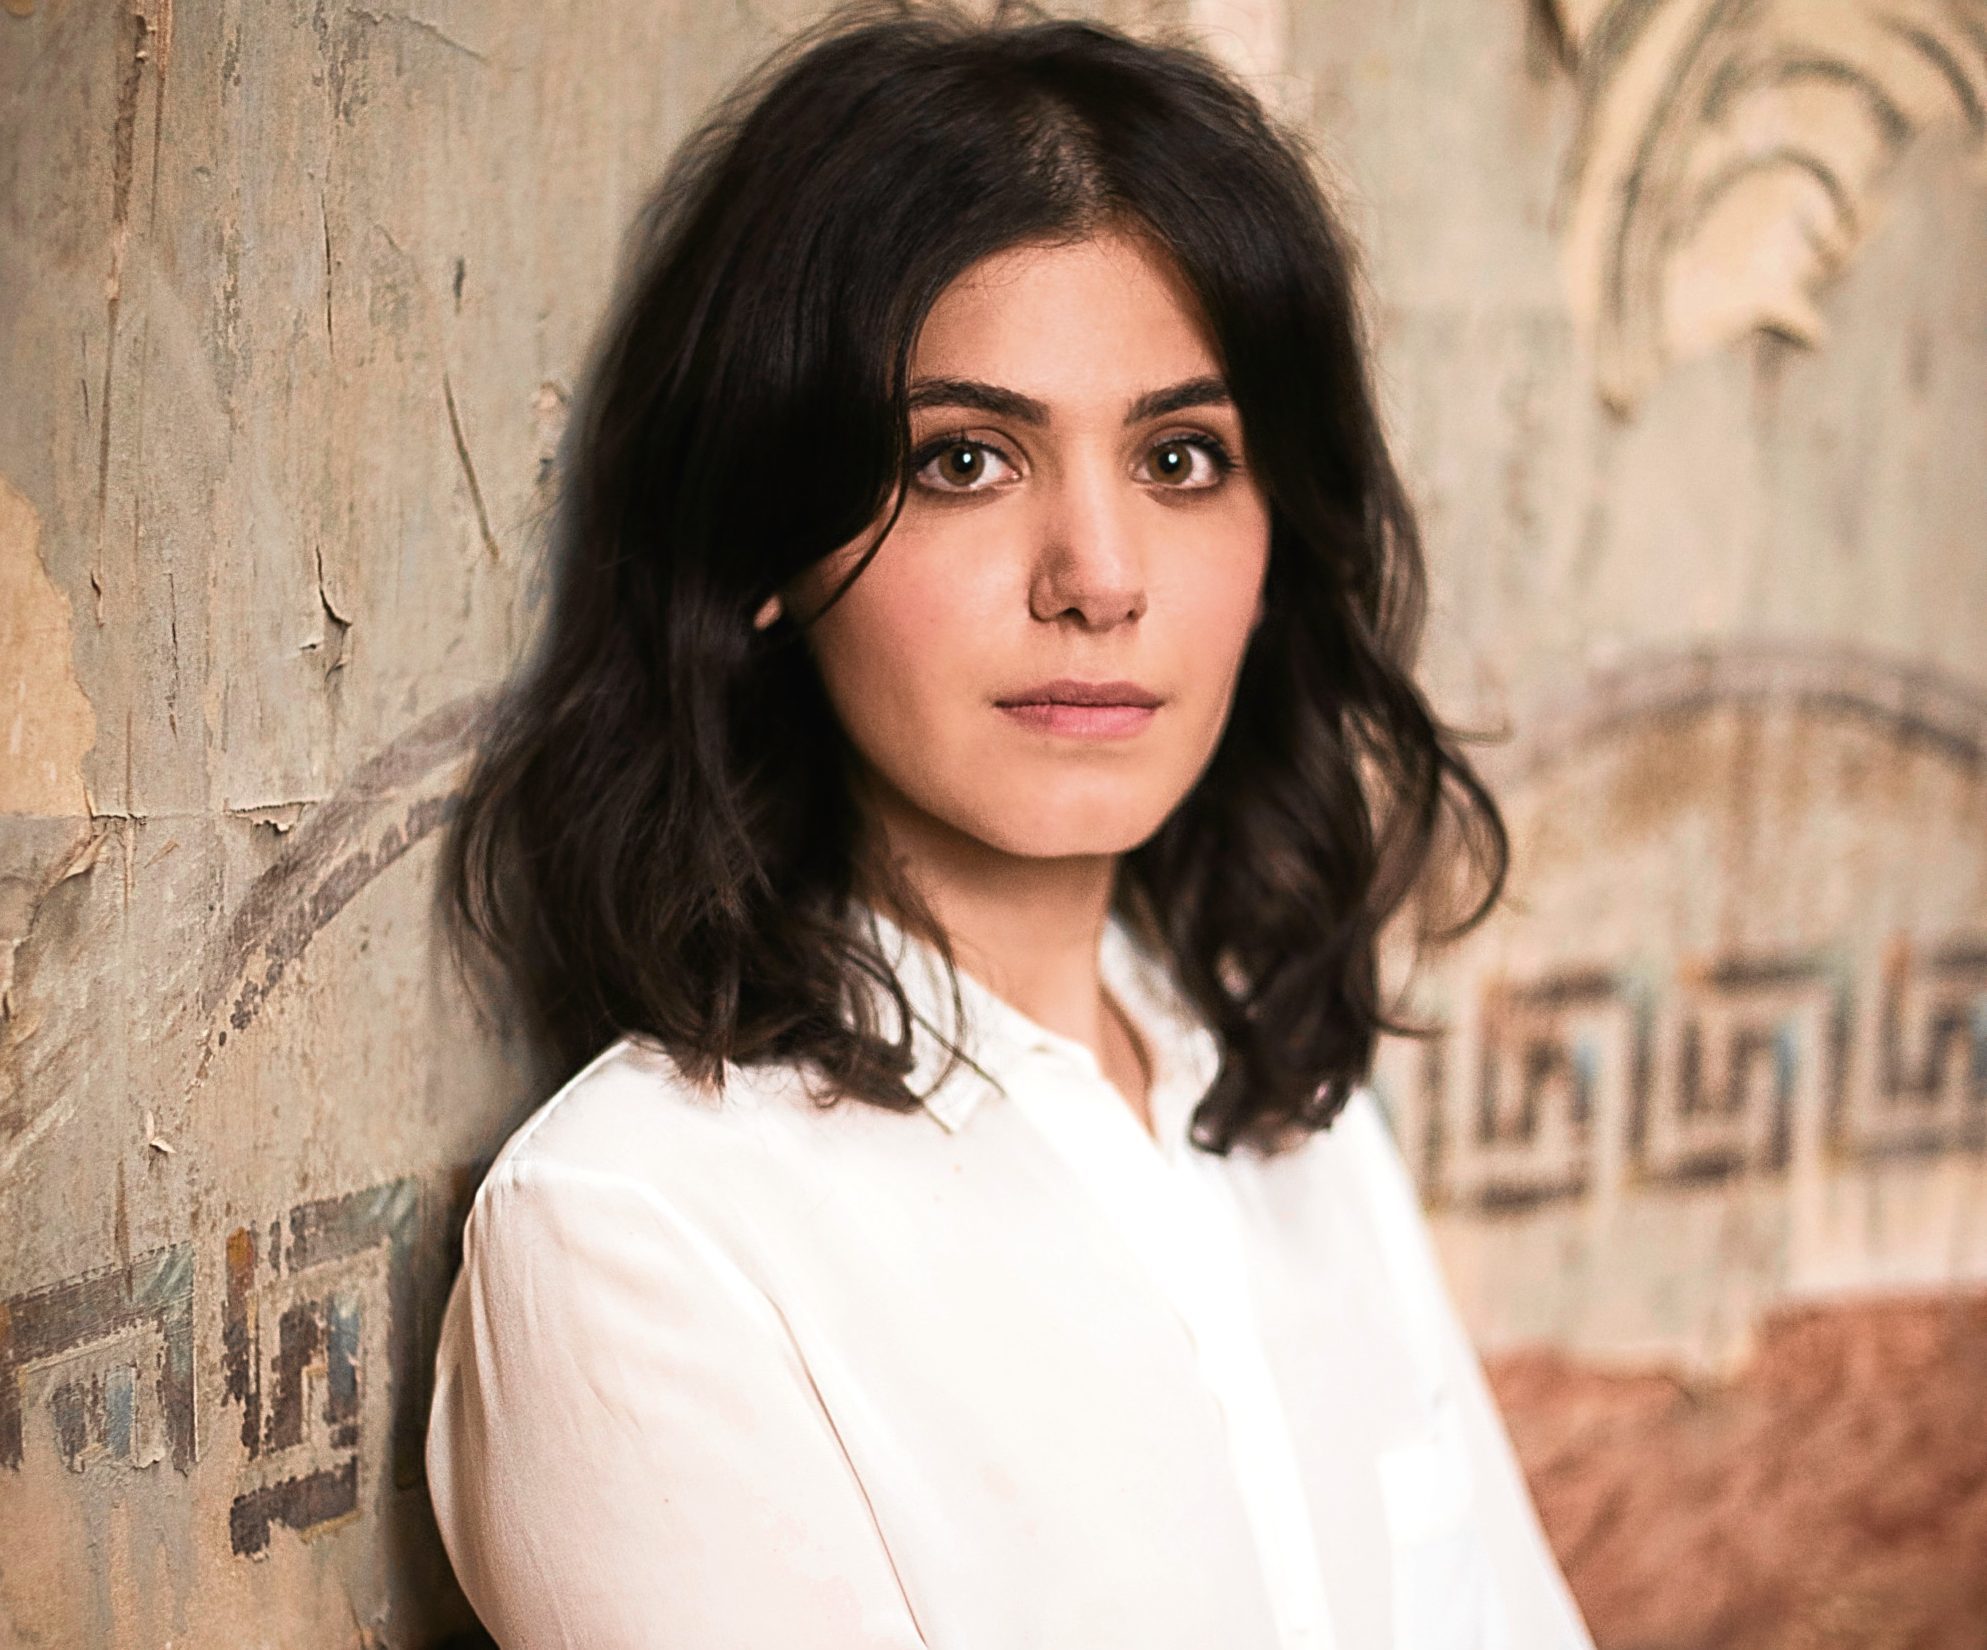 Katie Melua is taking her In Winter album on tour with a choir